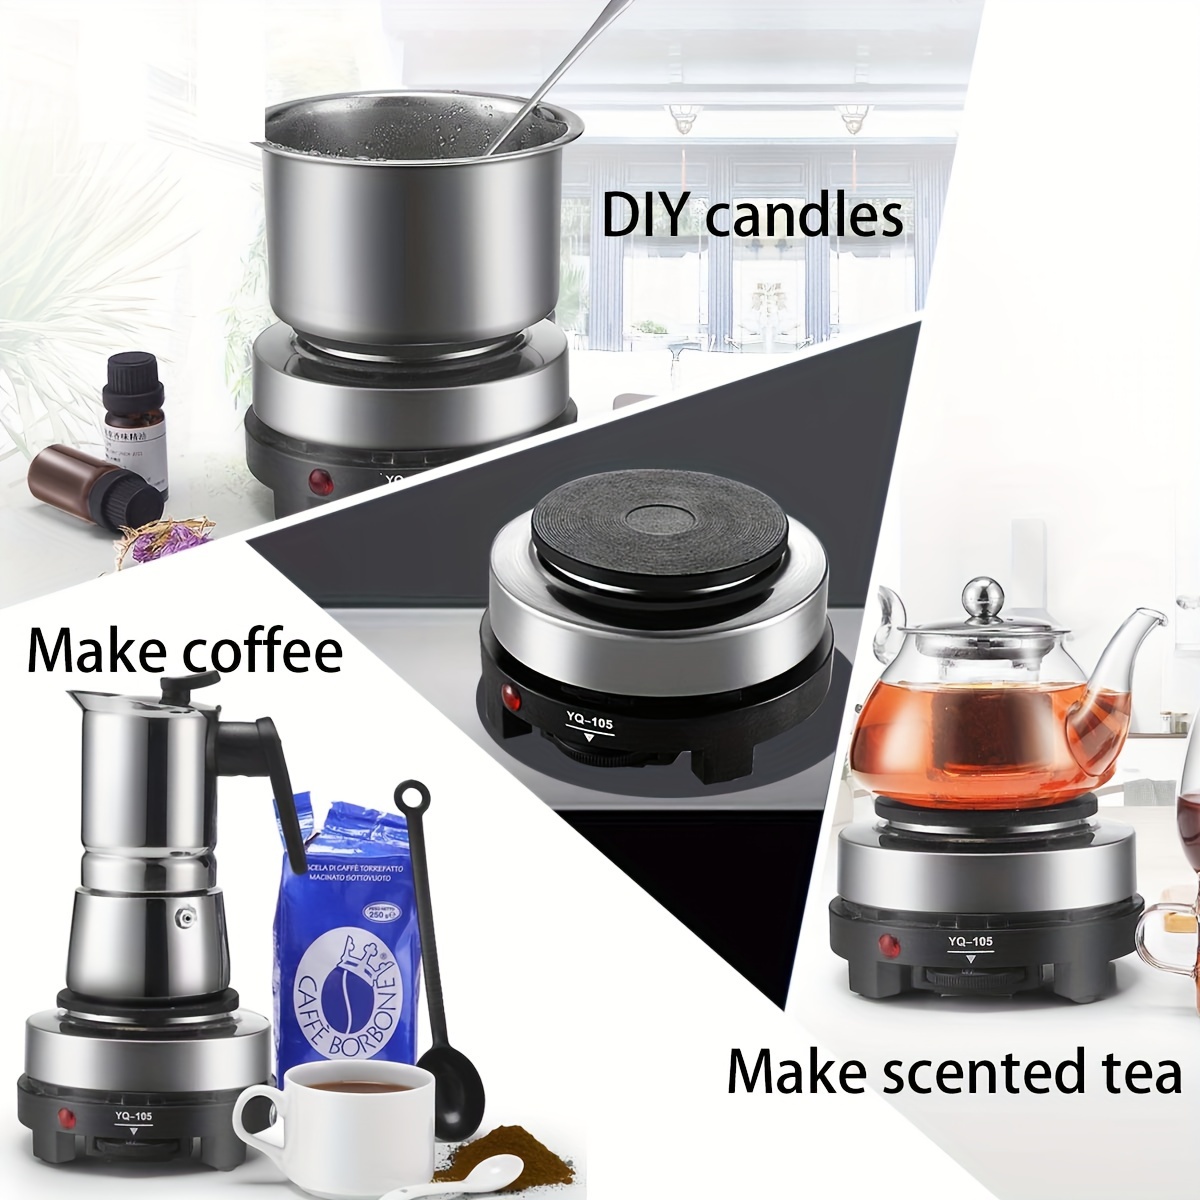 Hot Plate for Candle Making, Portable Electric Stove Melting Chocolate for  Candl